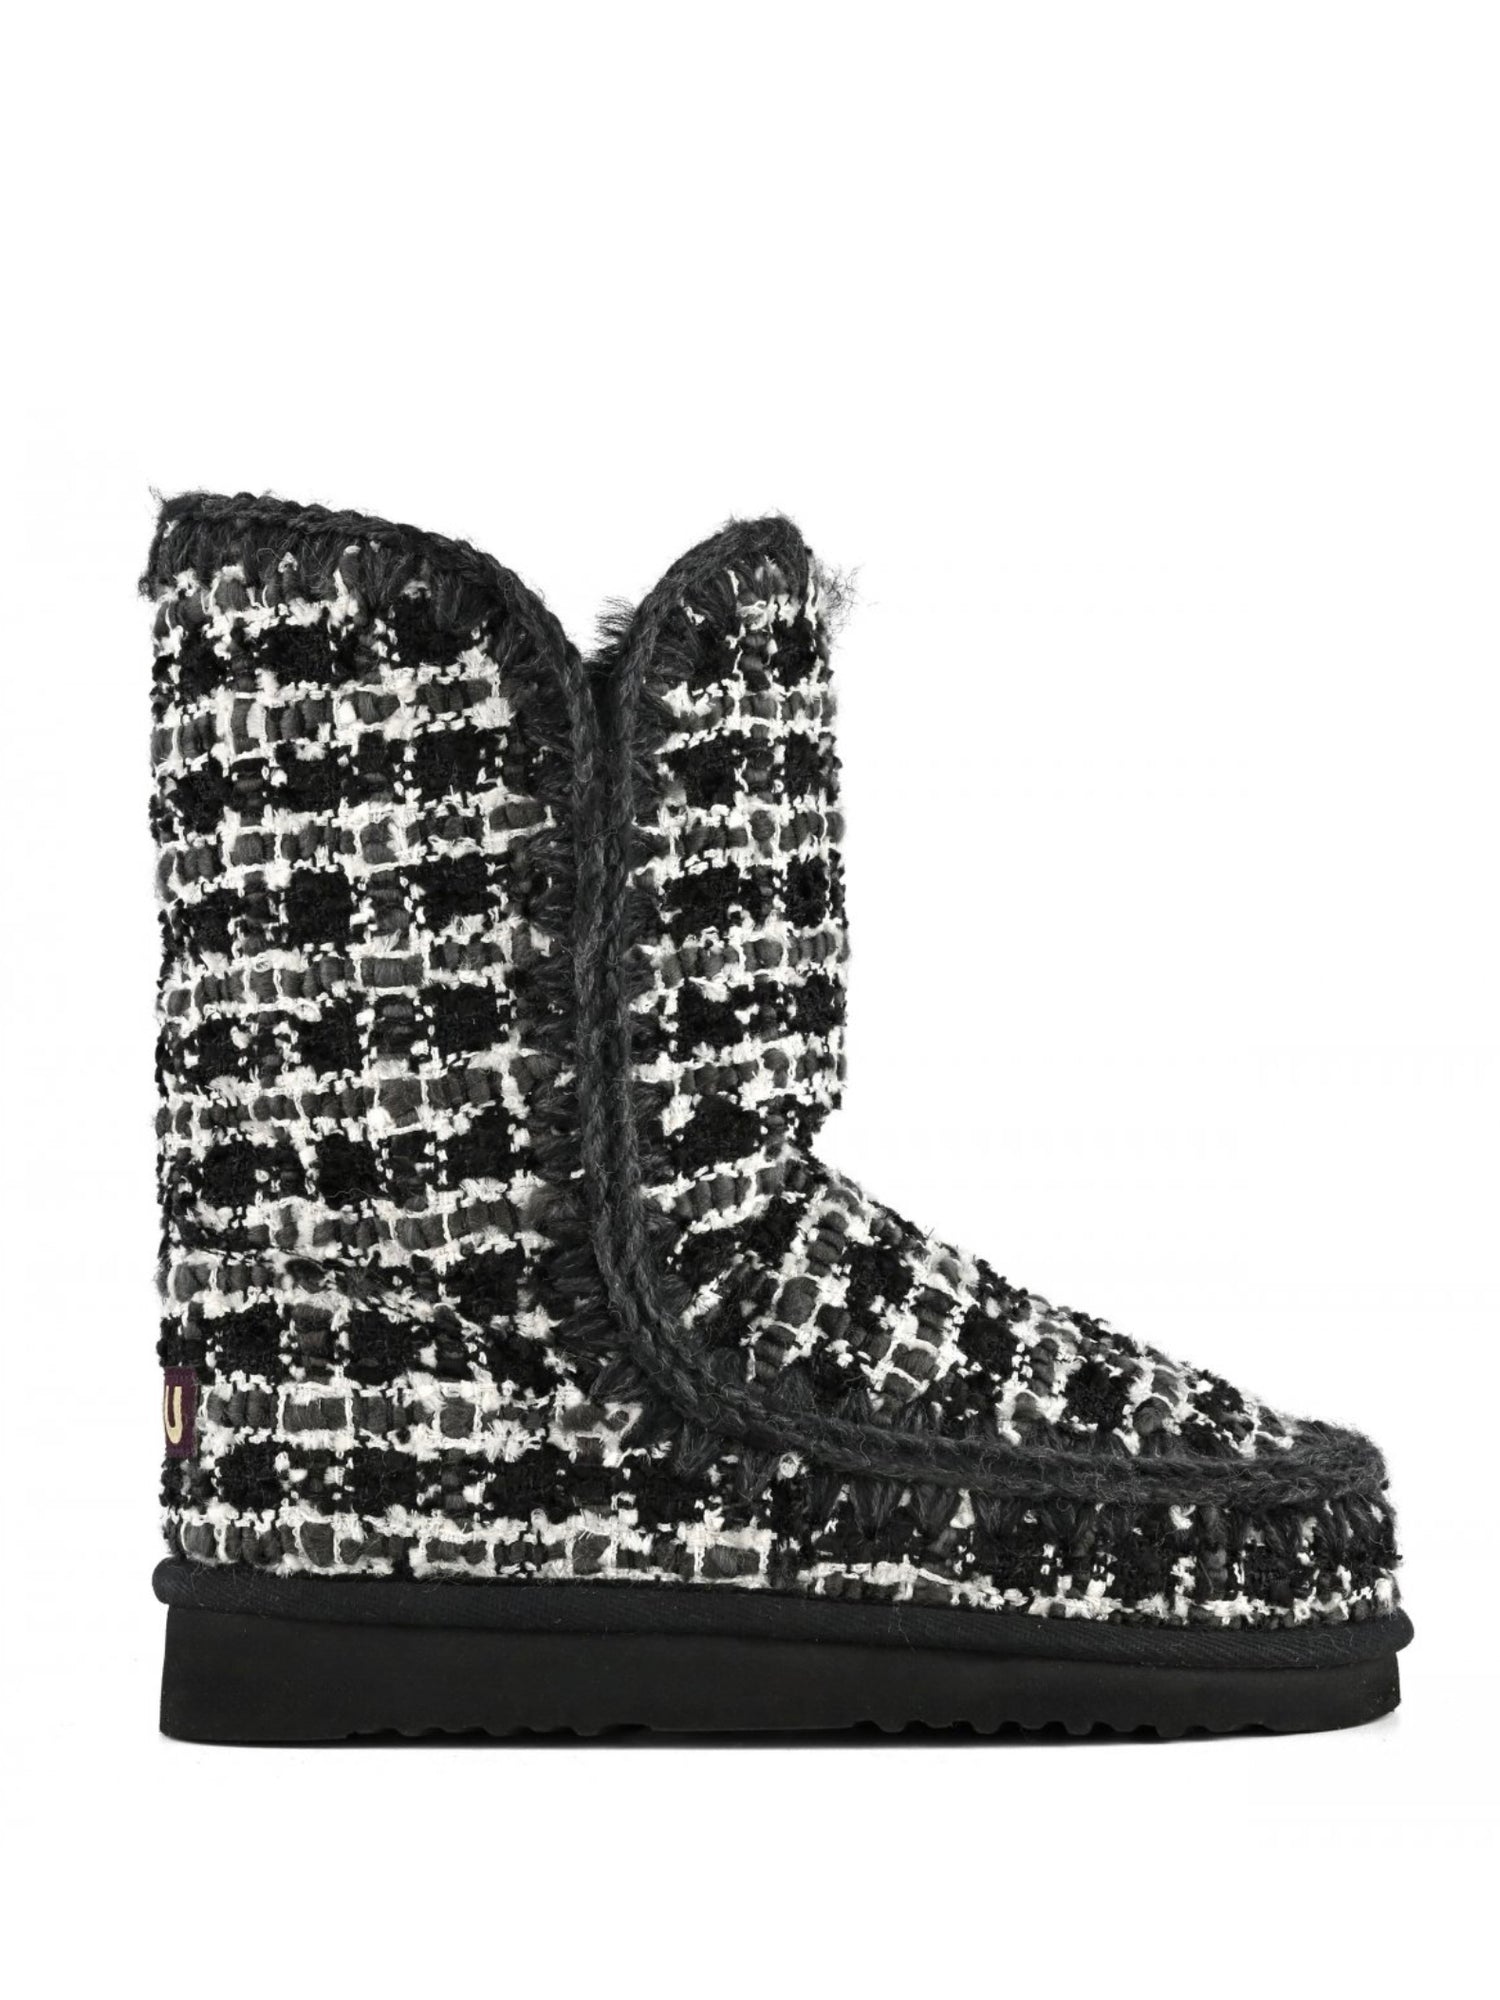 Inner wedge boots, black-white tweed with lurex